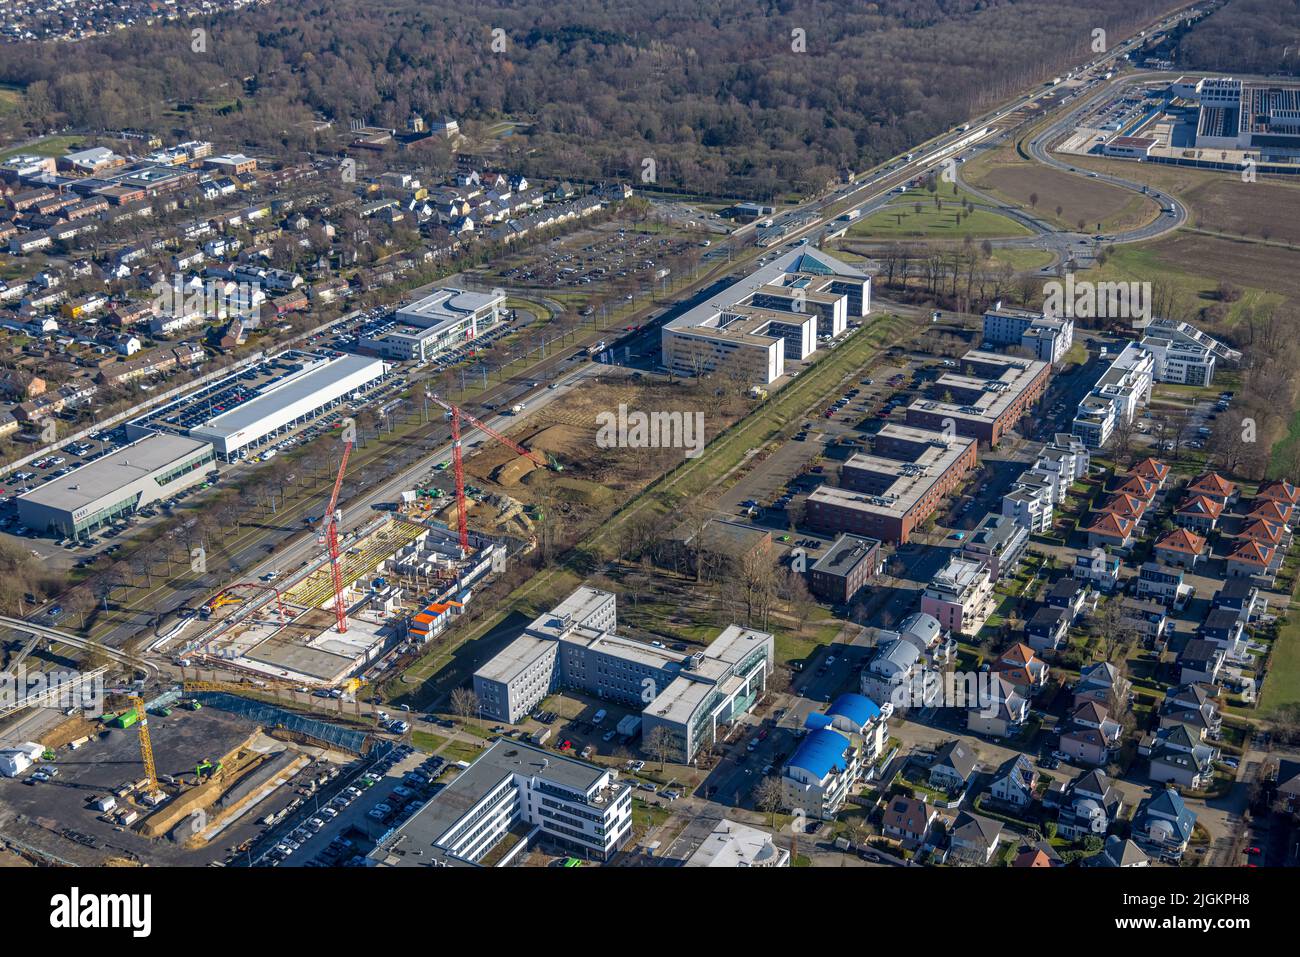 Aerial view, City Crone East, Federal Highway B1, A40 and B236, Aerial view, City Crone East, Federal Highway B1, A40 and B236, Dortmund, Ruhr Area, N Stock Photo